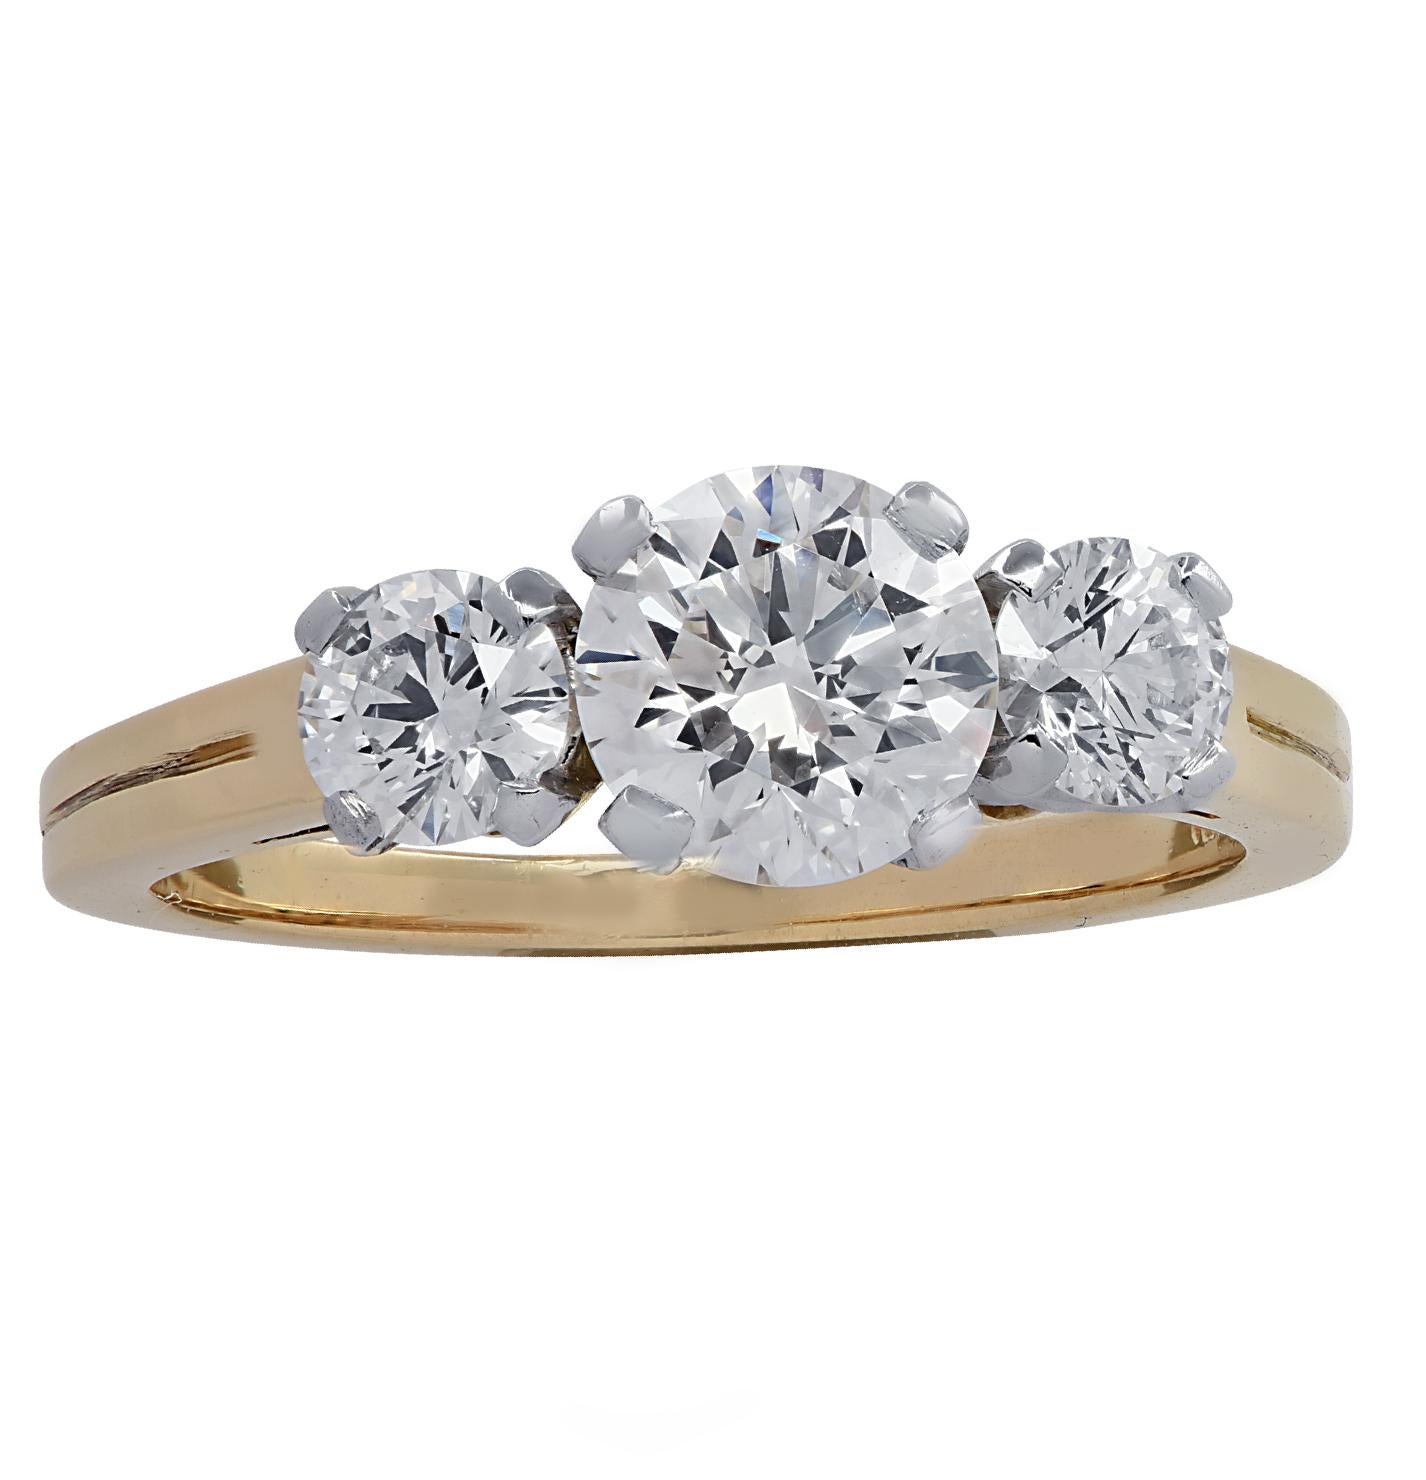 Tiffany & Co. Three Stone Engagement Ring crafted in 18 karat yellow gold and platinum, showcasing a round brilliant cut diamond weighing .90 carats, H-I color VS clarity accented by 2 round brilliant cut diamonds weighing approximately .50cts total